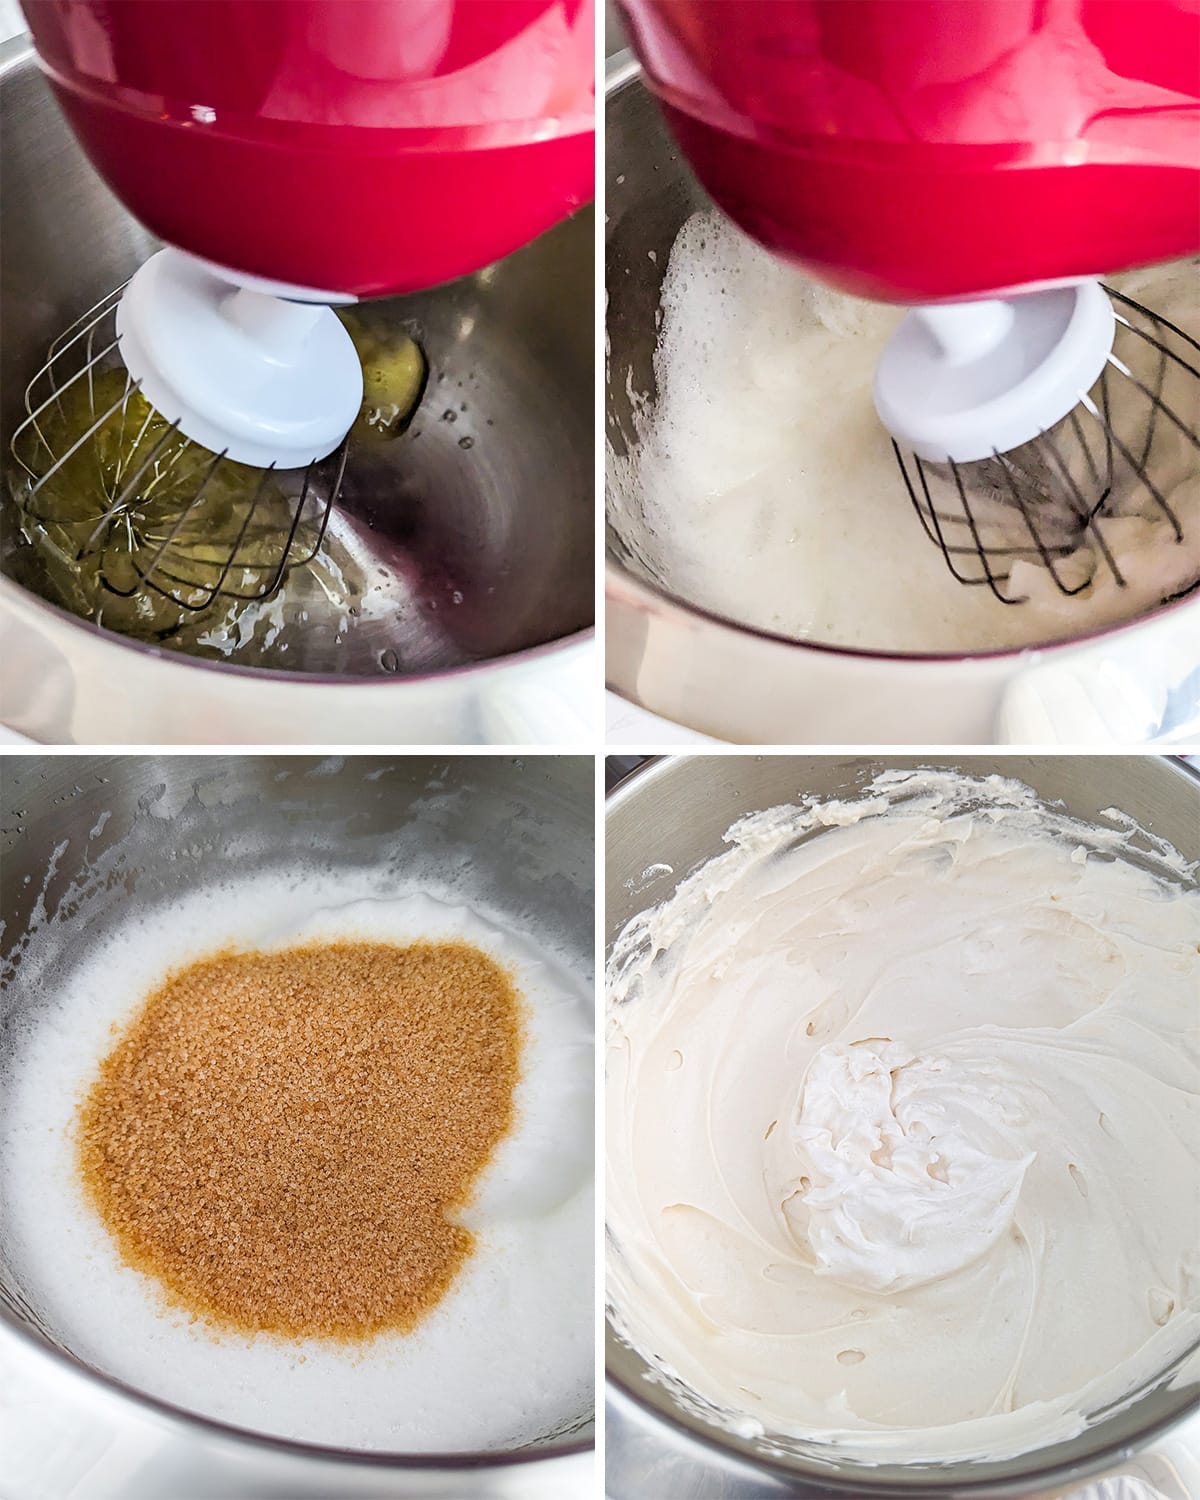 Beating eggs with brown sugar process step-by-step.